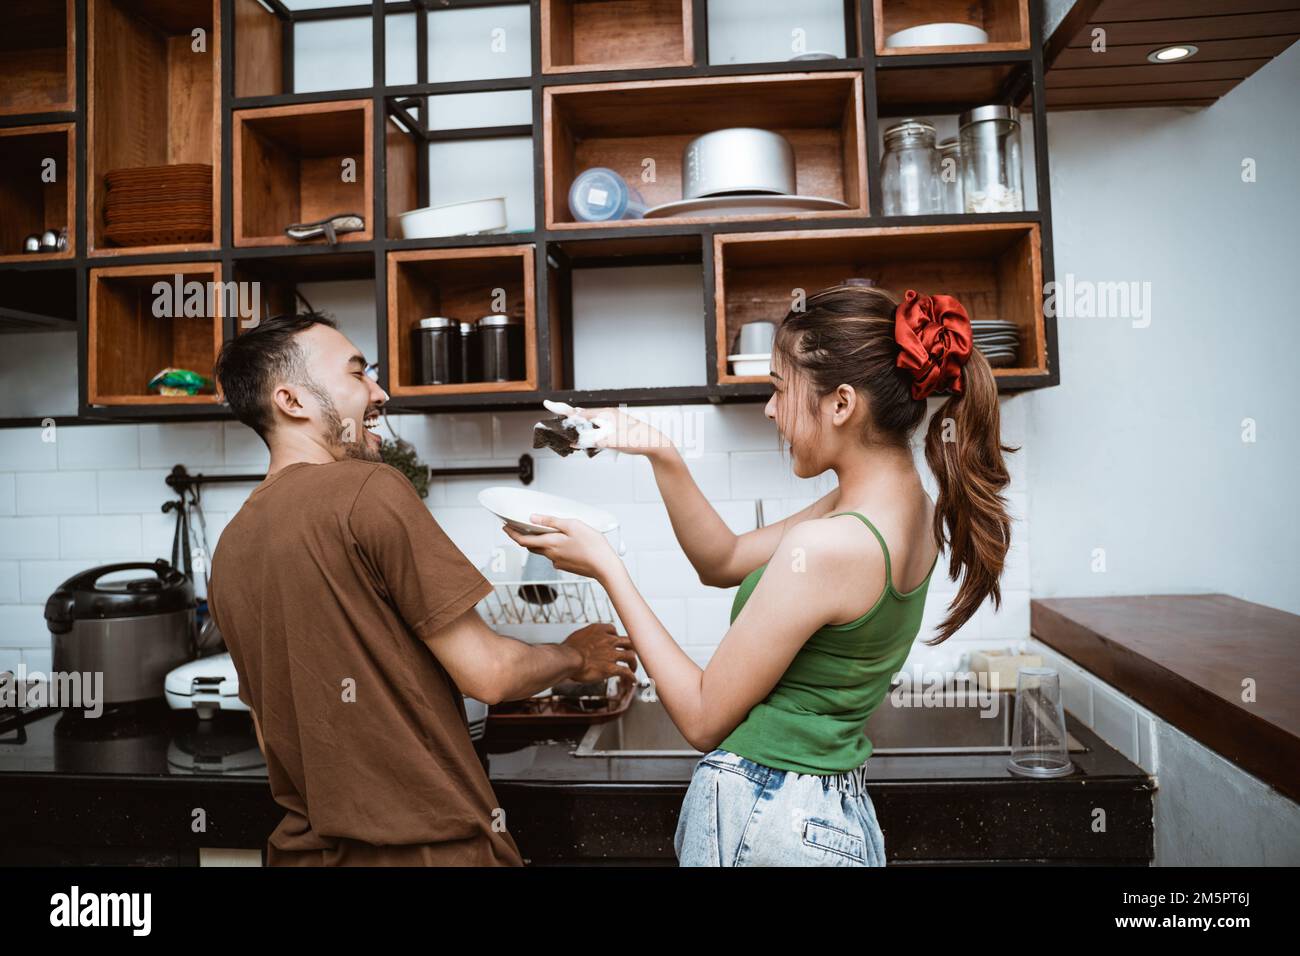 rear view of boy and girl joking while washing dishes Stock Photo